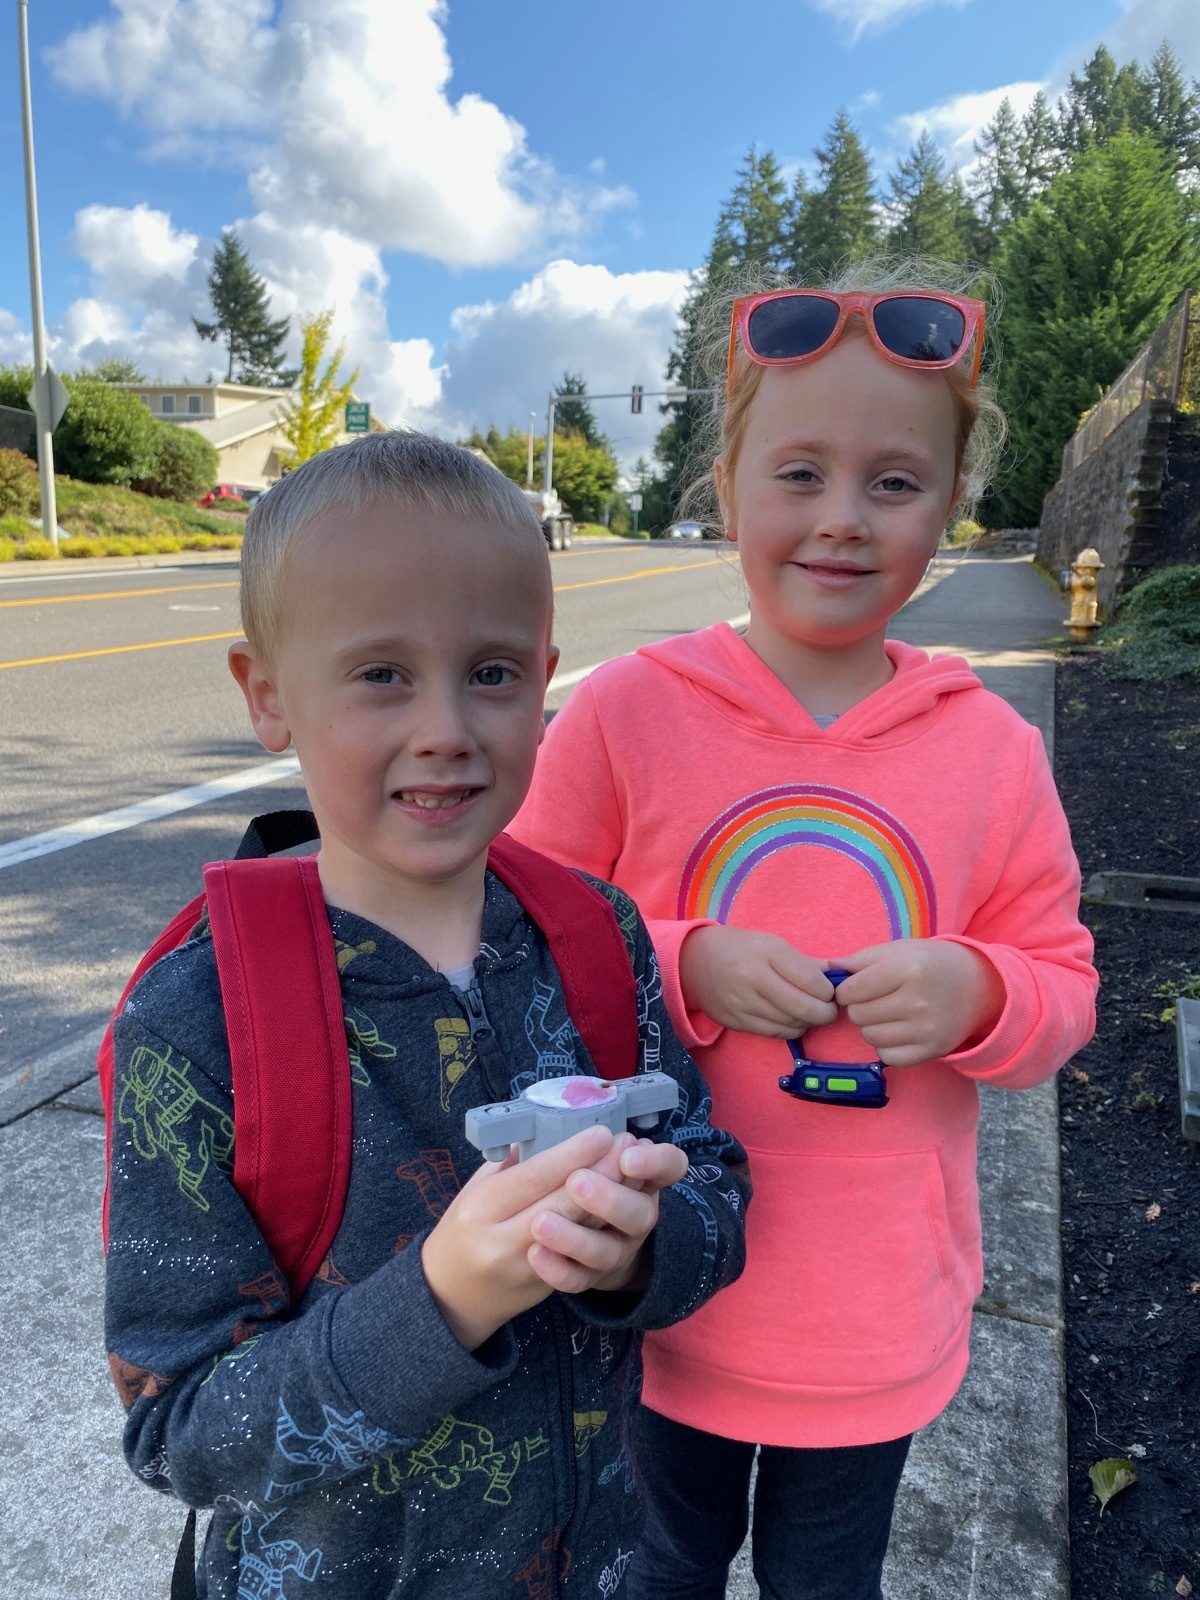 Getting into geocaching